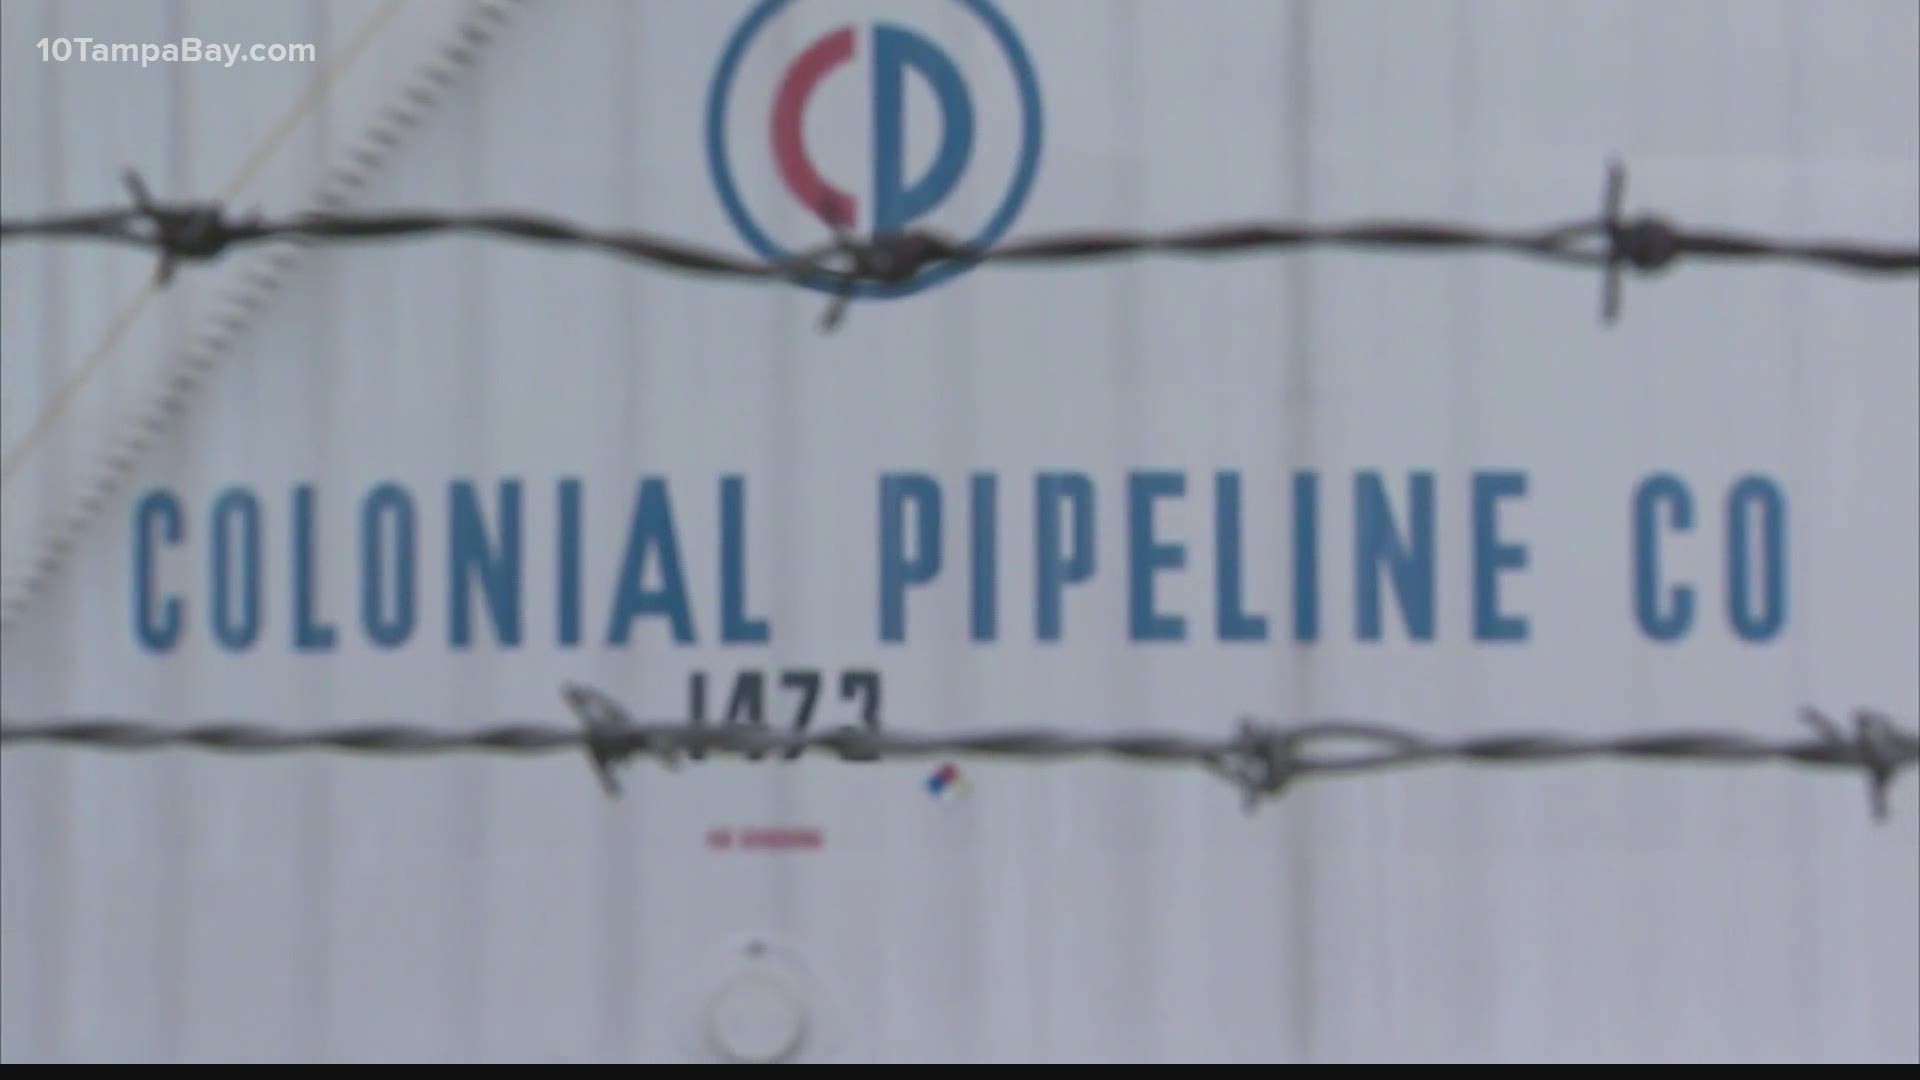 Georgia-based Colonial Pipeline temporarily shut down its operations in early May after a gang of criminal hackers known as DarkSide broke into its computer system.